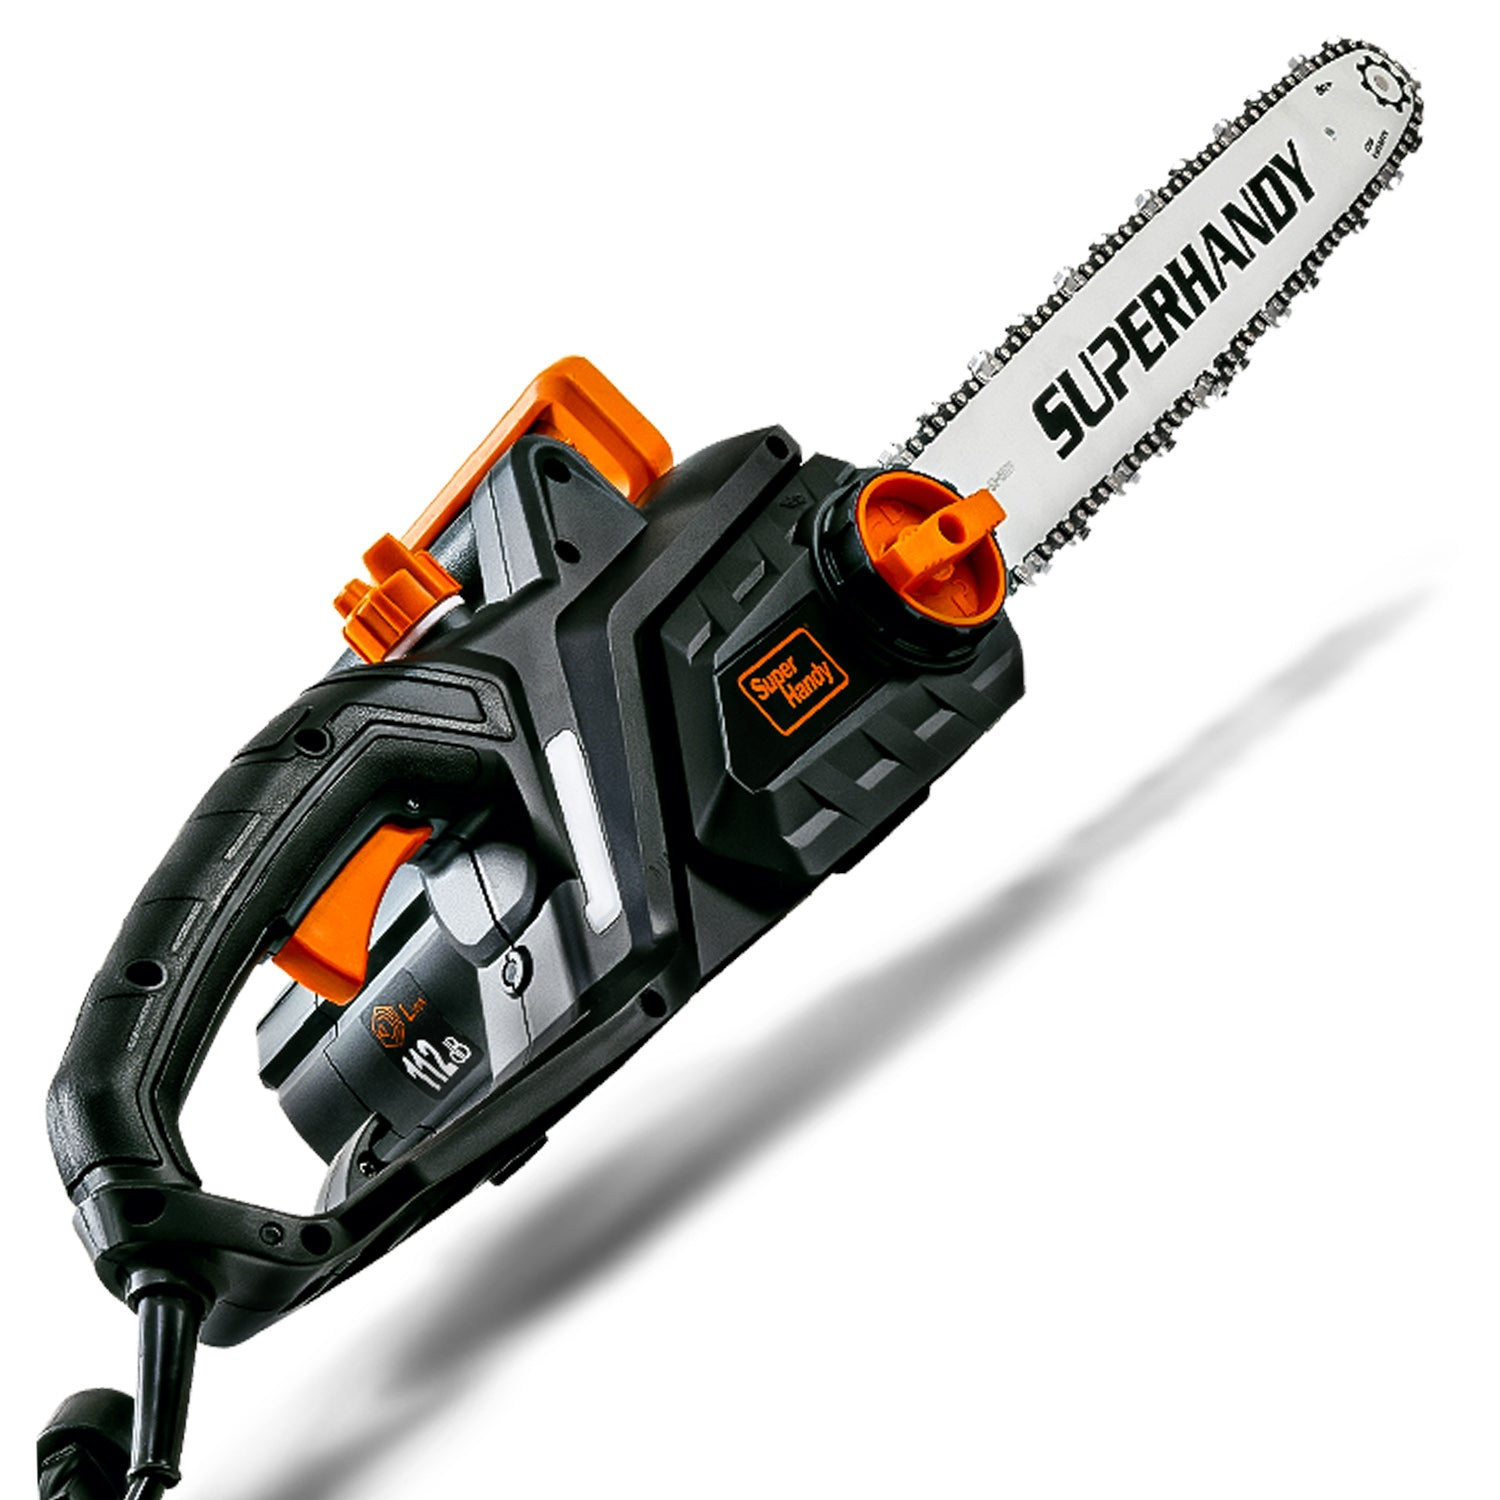 SuperHandy Electric Chainsaw - 120V Corded, 18" Bar